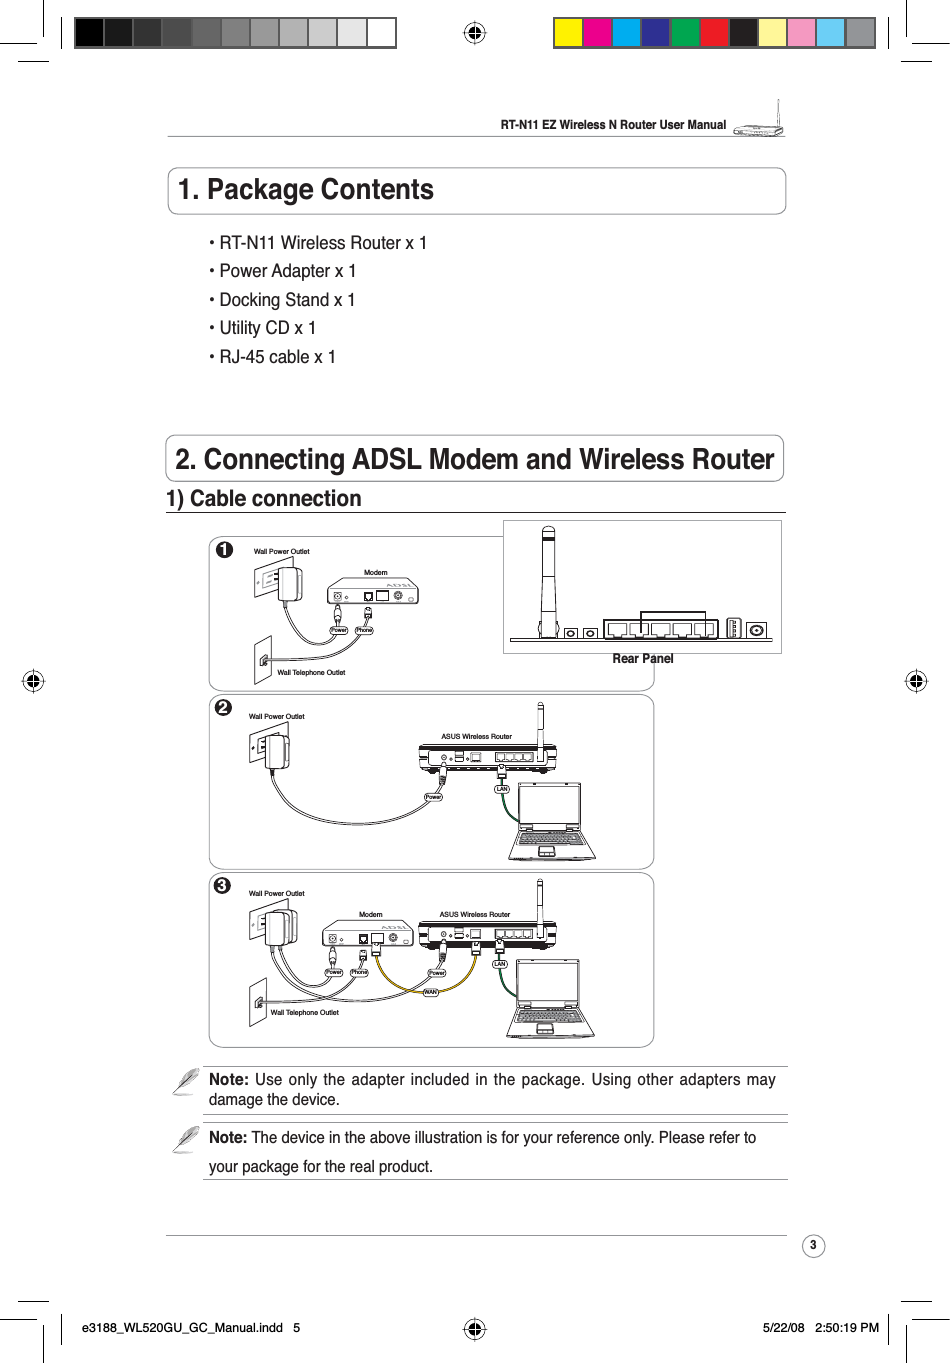 RT-N11 EZ Wireless N Router User Manual3R2. Connecting ADSL Modem and Wireless Router1. Package Contents • RT-N11 Wireless Router x 1 • Power Adapter x 1 • Docking Stand x 1 • Utility CD x 1 • RJ-45 cable x 11) Cable connection1ModemWall Telephone OutletWall Power OutletPhonePower2Wall Power OutletASUS Wireless RouterLAN3ModemWall Telephone OutletWall Power OutletLANPowerPhonePowerASUS Wireless RouterWANPowerNote: Use only the adapter included in the package. Using other adapters maydamage the device.Note: The device in the above illustration is for your reference only. Please refer toyour package for the real product.Rear Panele3188_WL520GU_GC_Manual.indd   5 5/22/08   2:50:19 PM